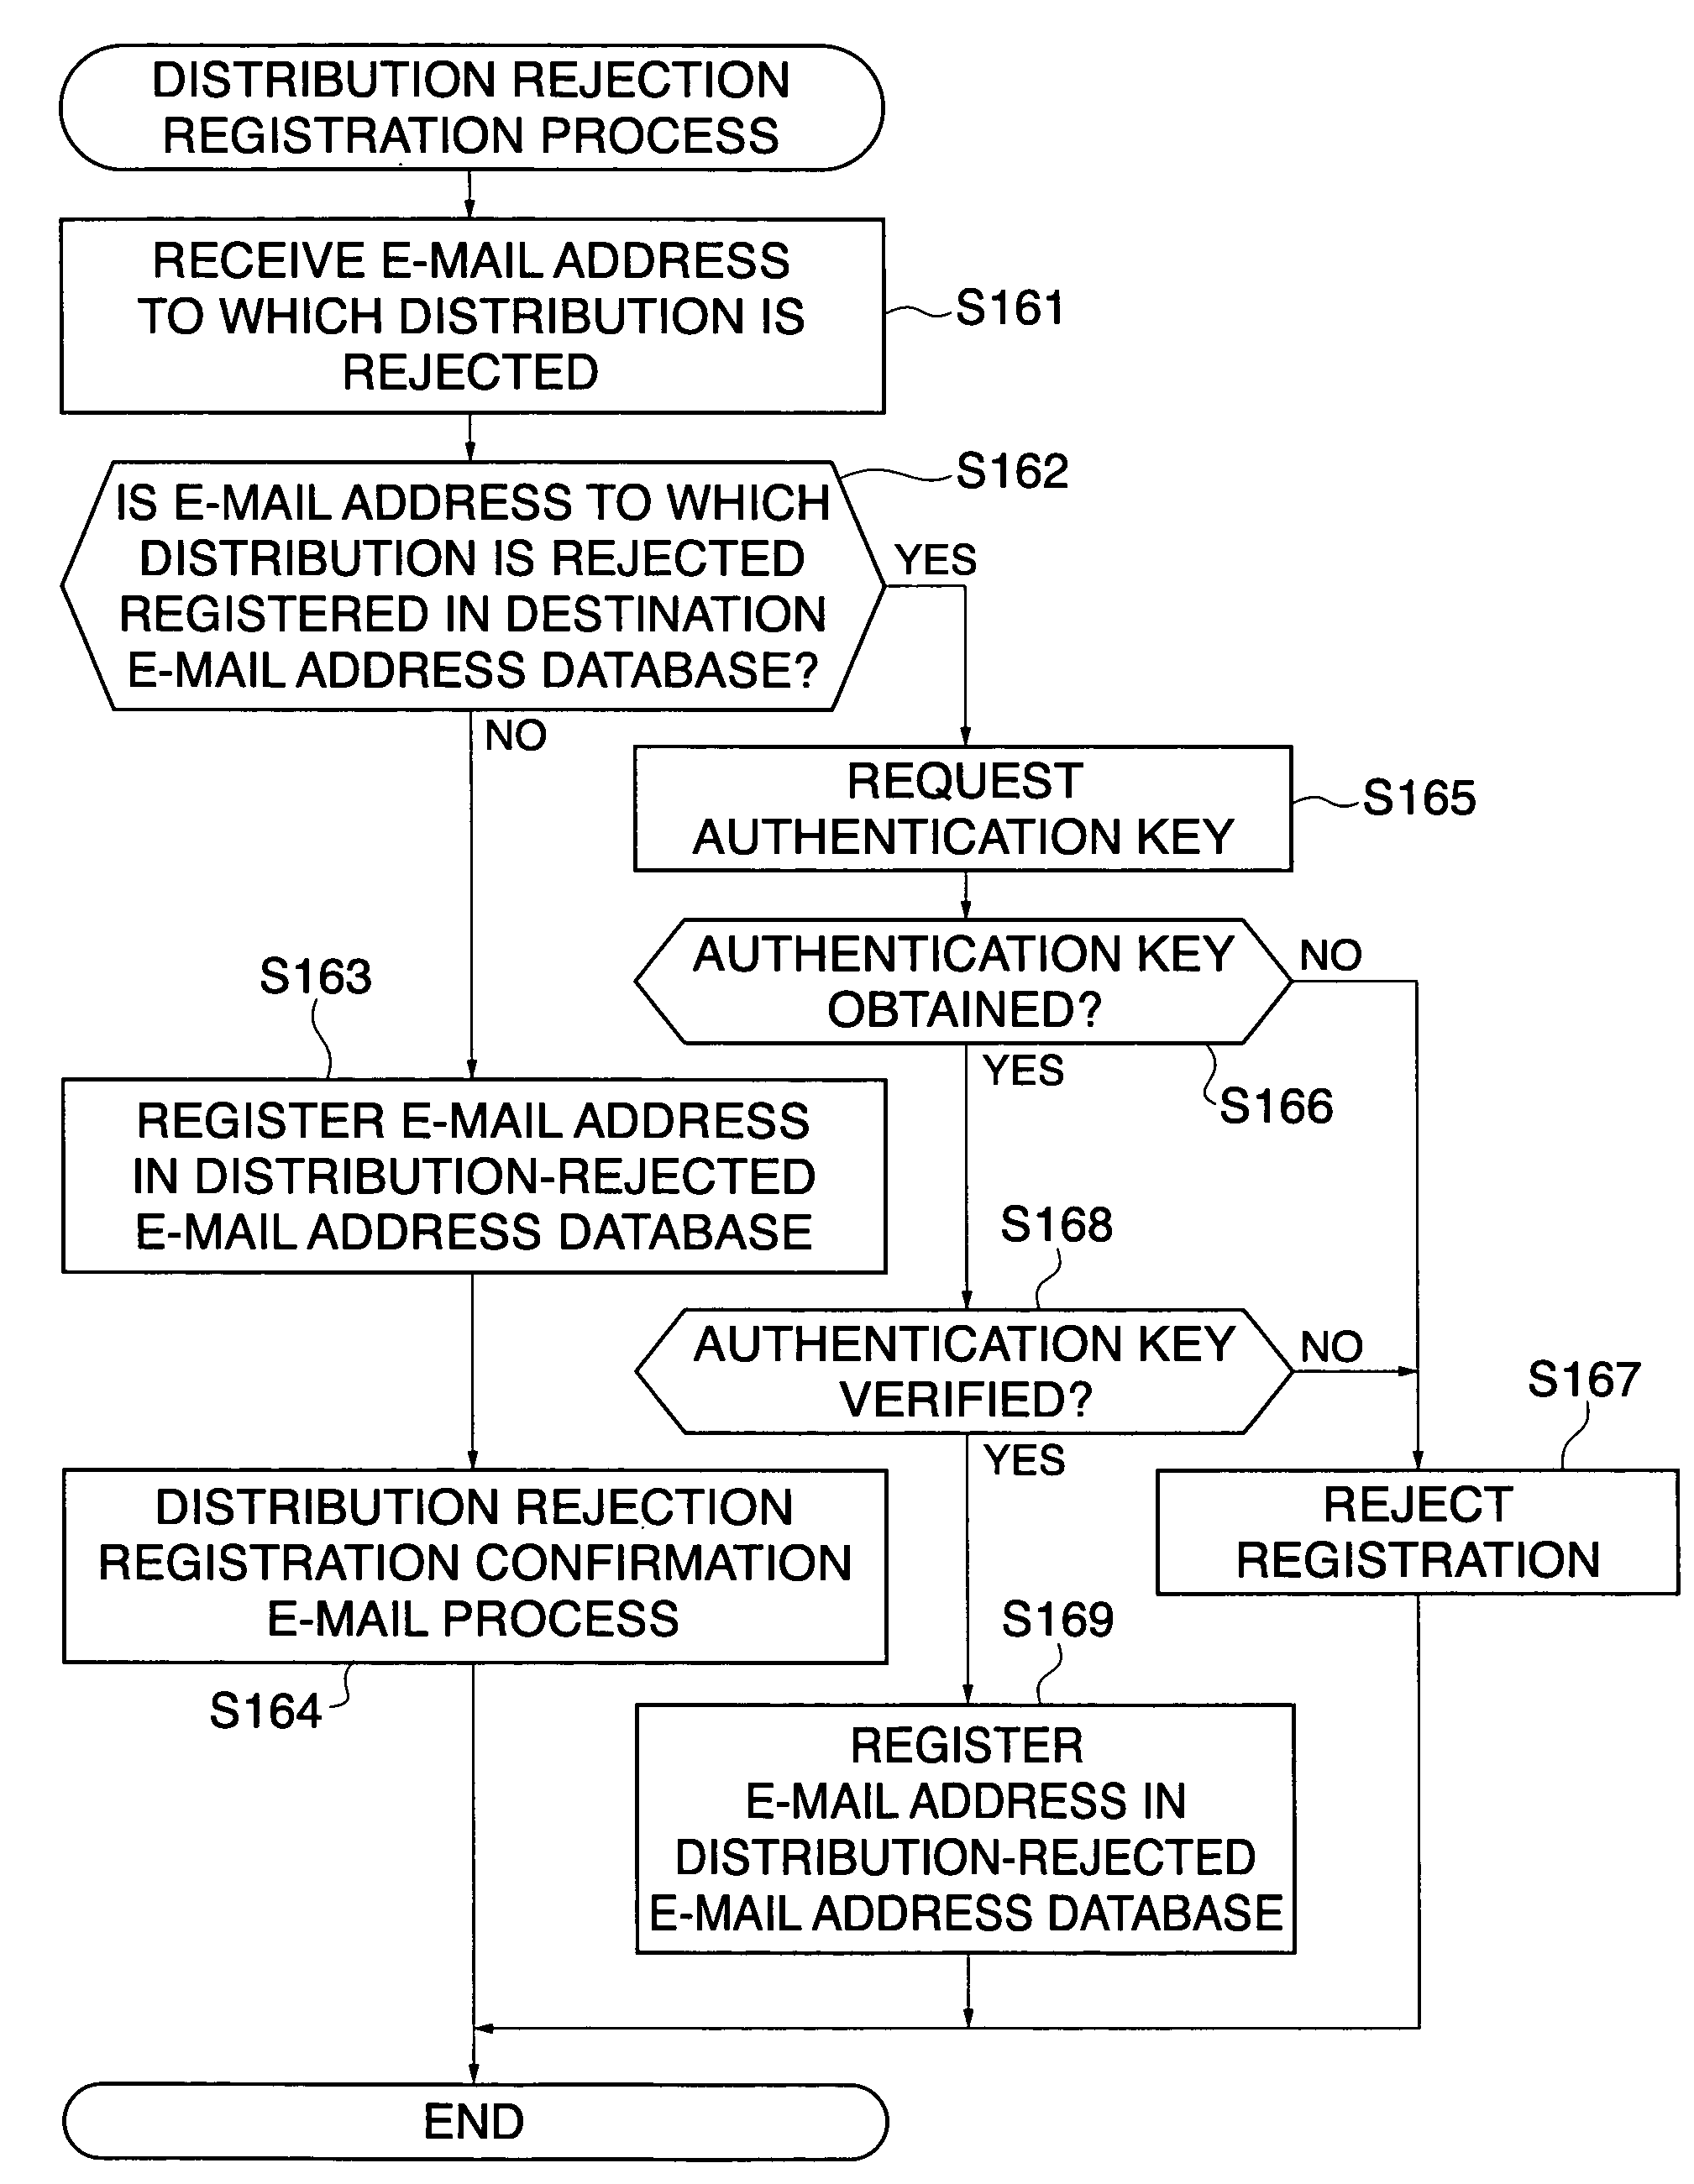 Electronic mail distributing apparatus with email address registration or authentication features, electronic mail distributing method therefor, and storage medium storing a program for the apparatus